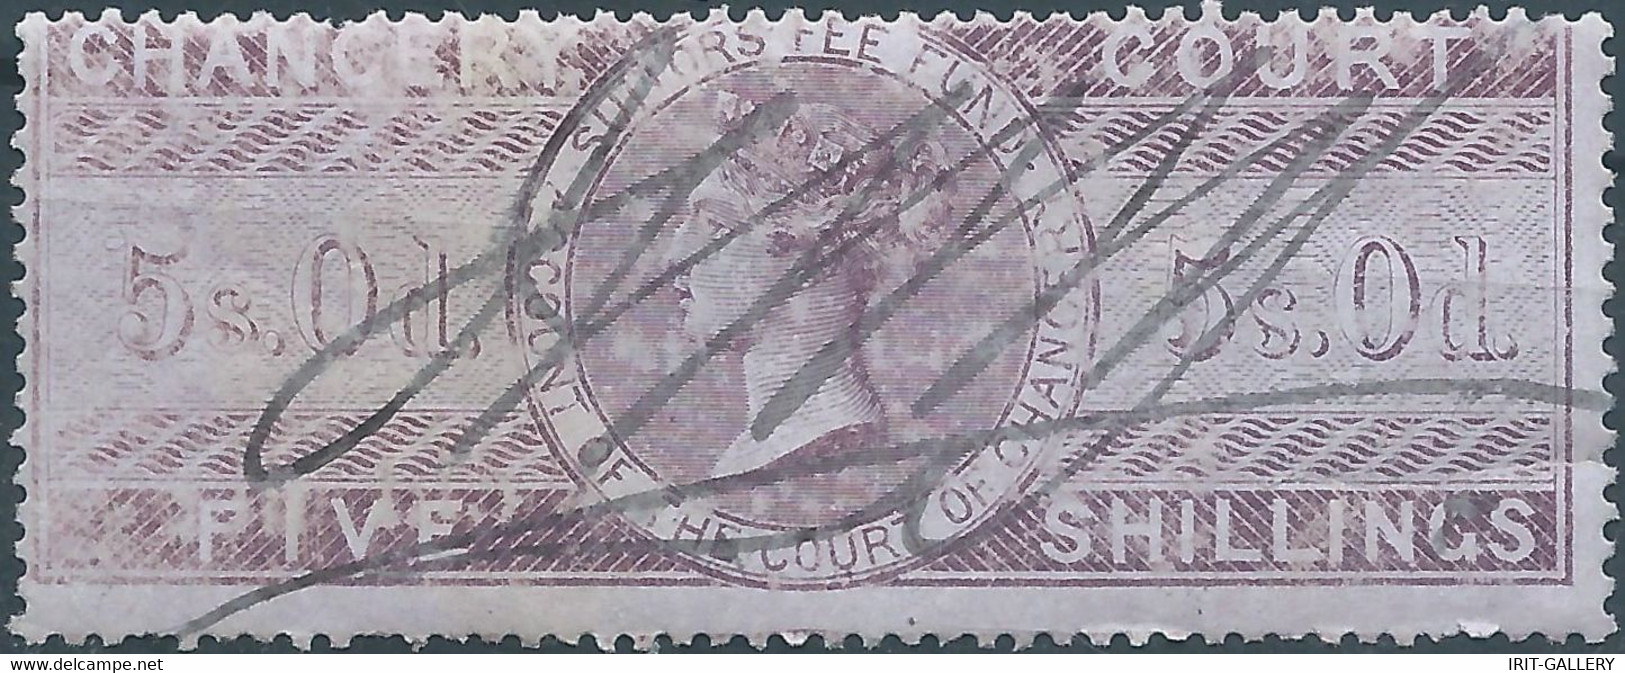 Great Britain-ENGLAND,Queen Victoria,1855 /1870 Revenue Stamp Tax Fiscal CHANCERY COURT,5s.0d. FIVE Shillings,Used - Revenue Stamps